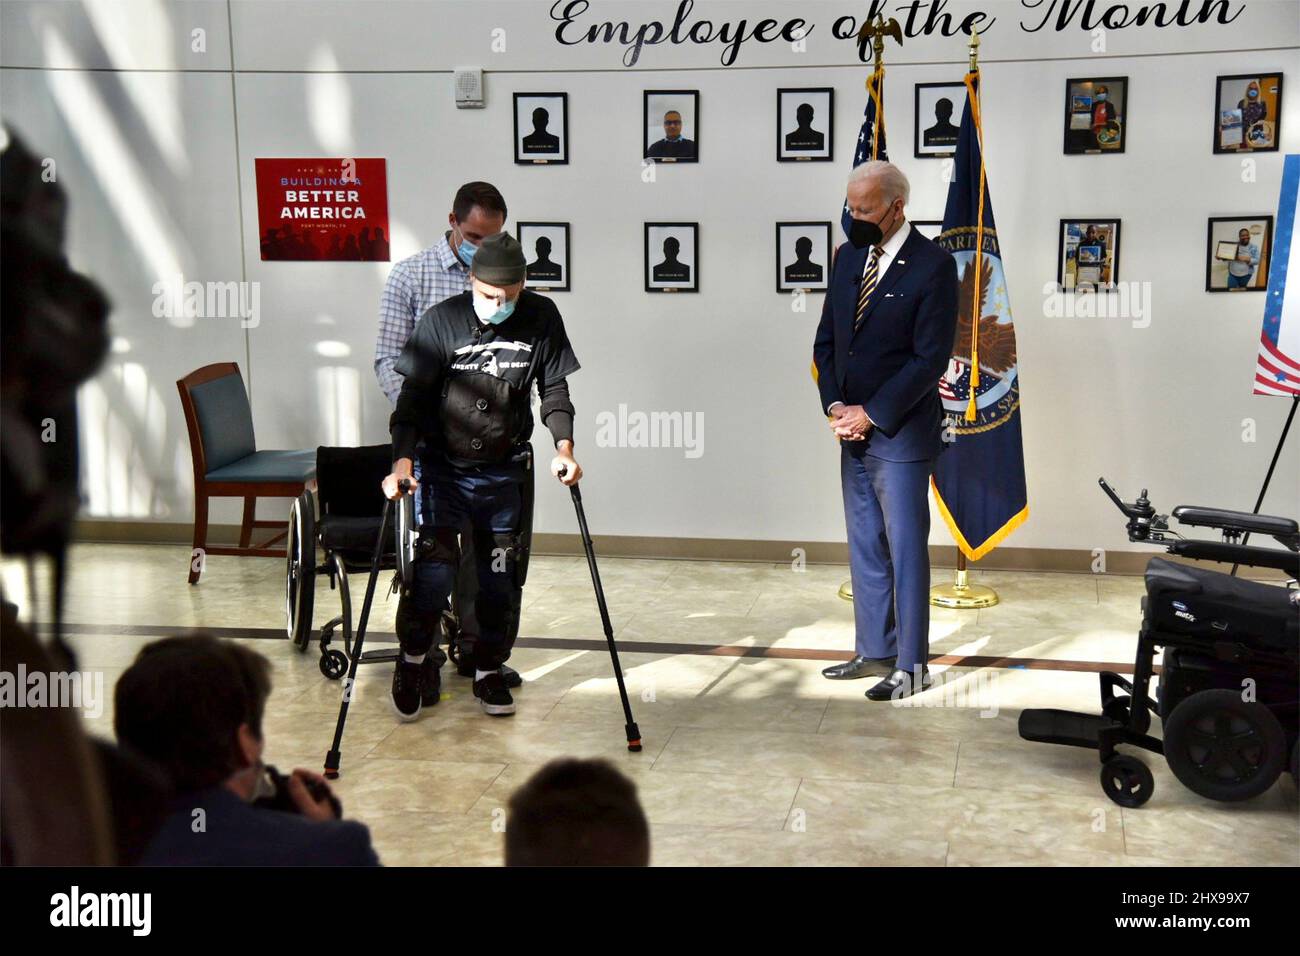 Fort Worth, United States of America. 08 March, 2022. U.S President Joe Biden watches Army Veteran John Caruso walk using an Exoskeleton system assisted by Spinal Cord Injury lead physical therapist Josh Geering, at the North Texas Ft. Worth Veterans Clinic, March 8, 2022 in Fort Worth, Texas. Credit: Veterans Affairs/Veterans Affairs/Alamy Live News Stock Photo